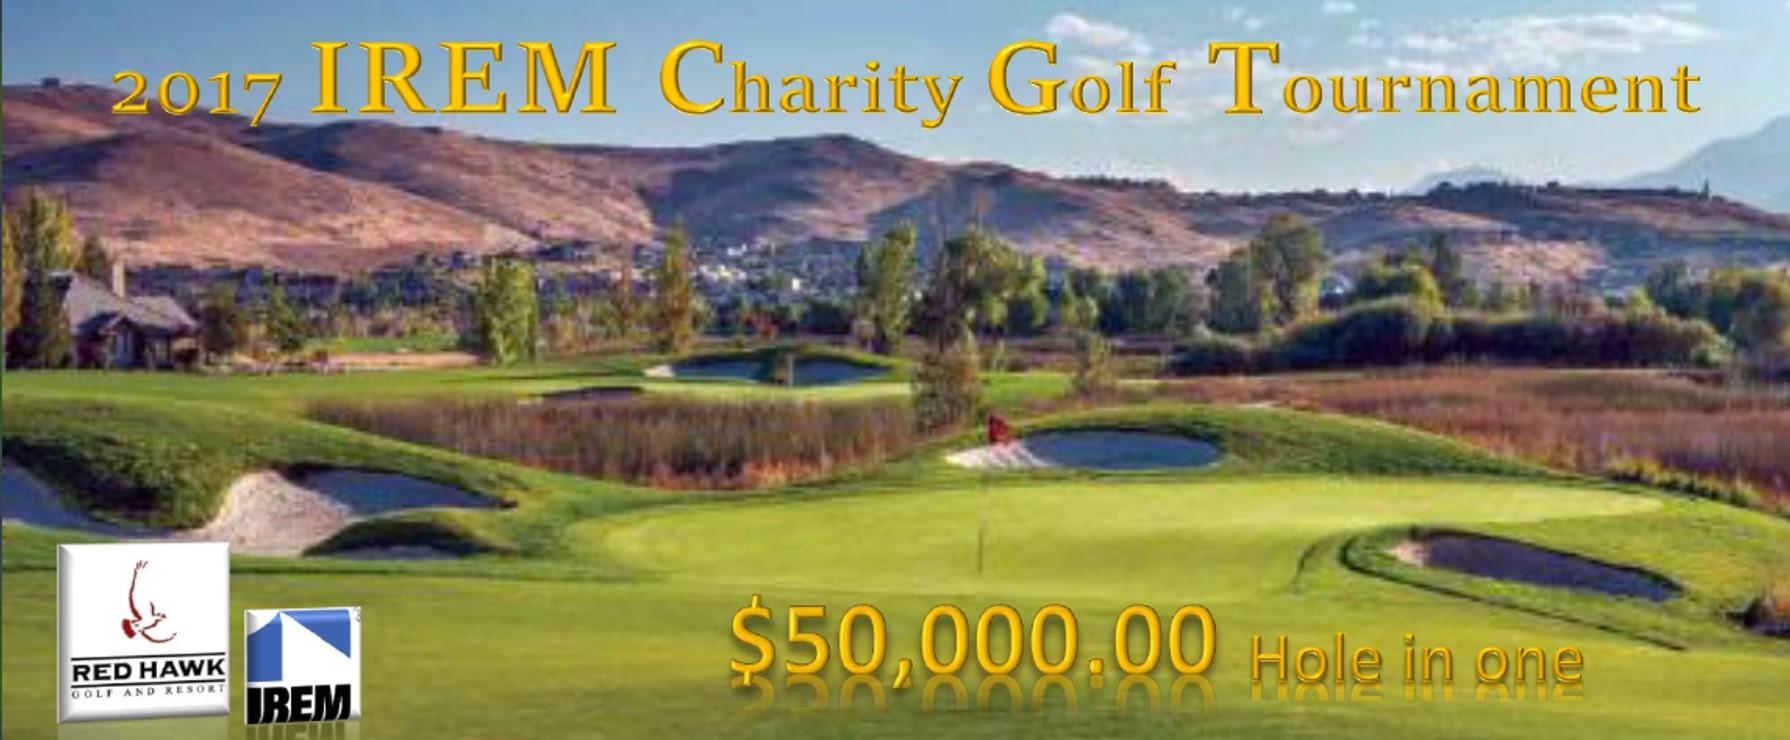 IREM's Annual Charity Golf Tournament - 2017